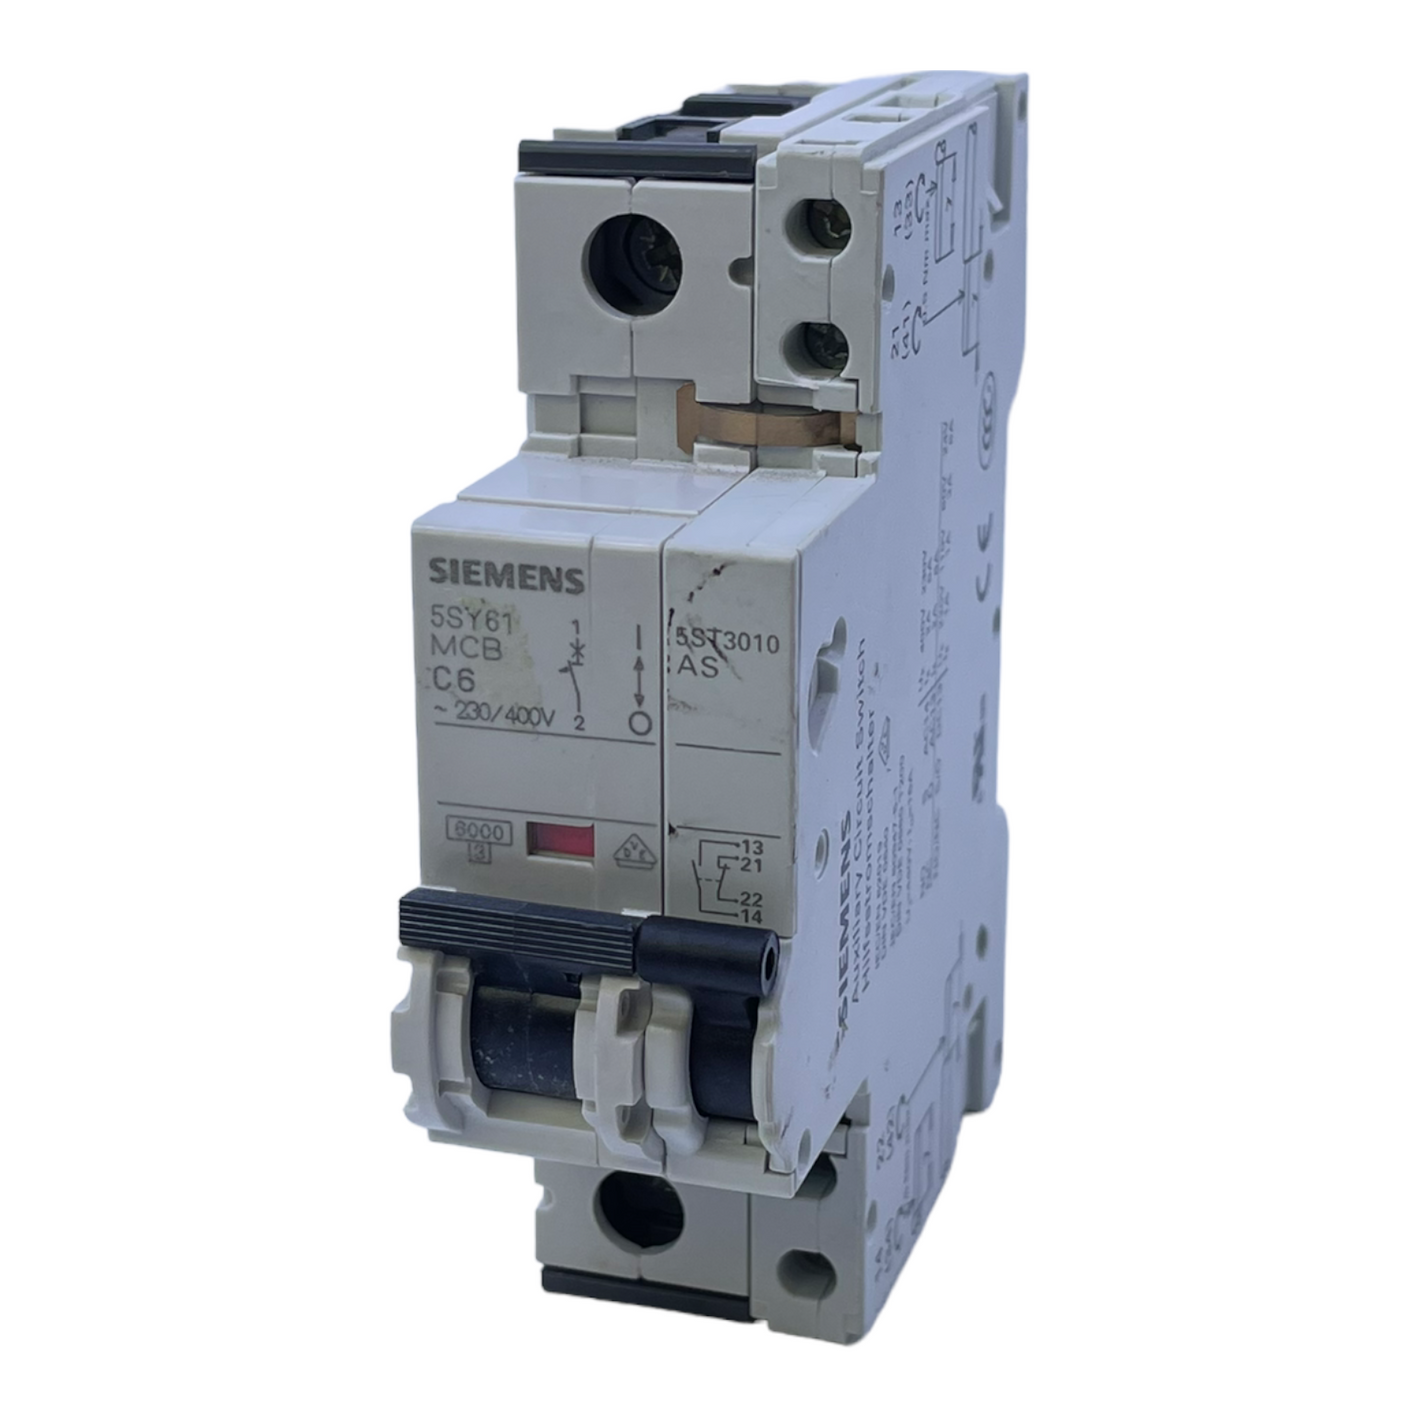 Siemens 5SY61MCB C6 power contactor +5ST3010AS 230/400V 6/2A contactor 